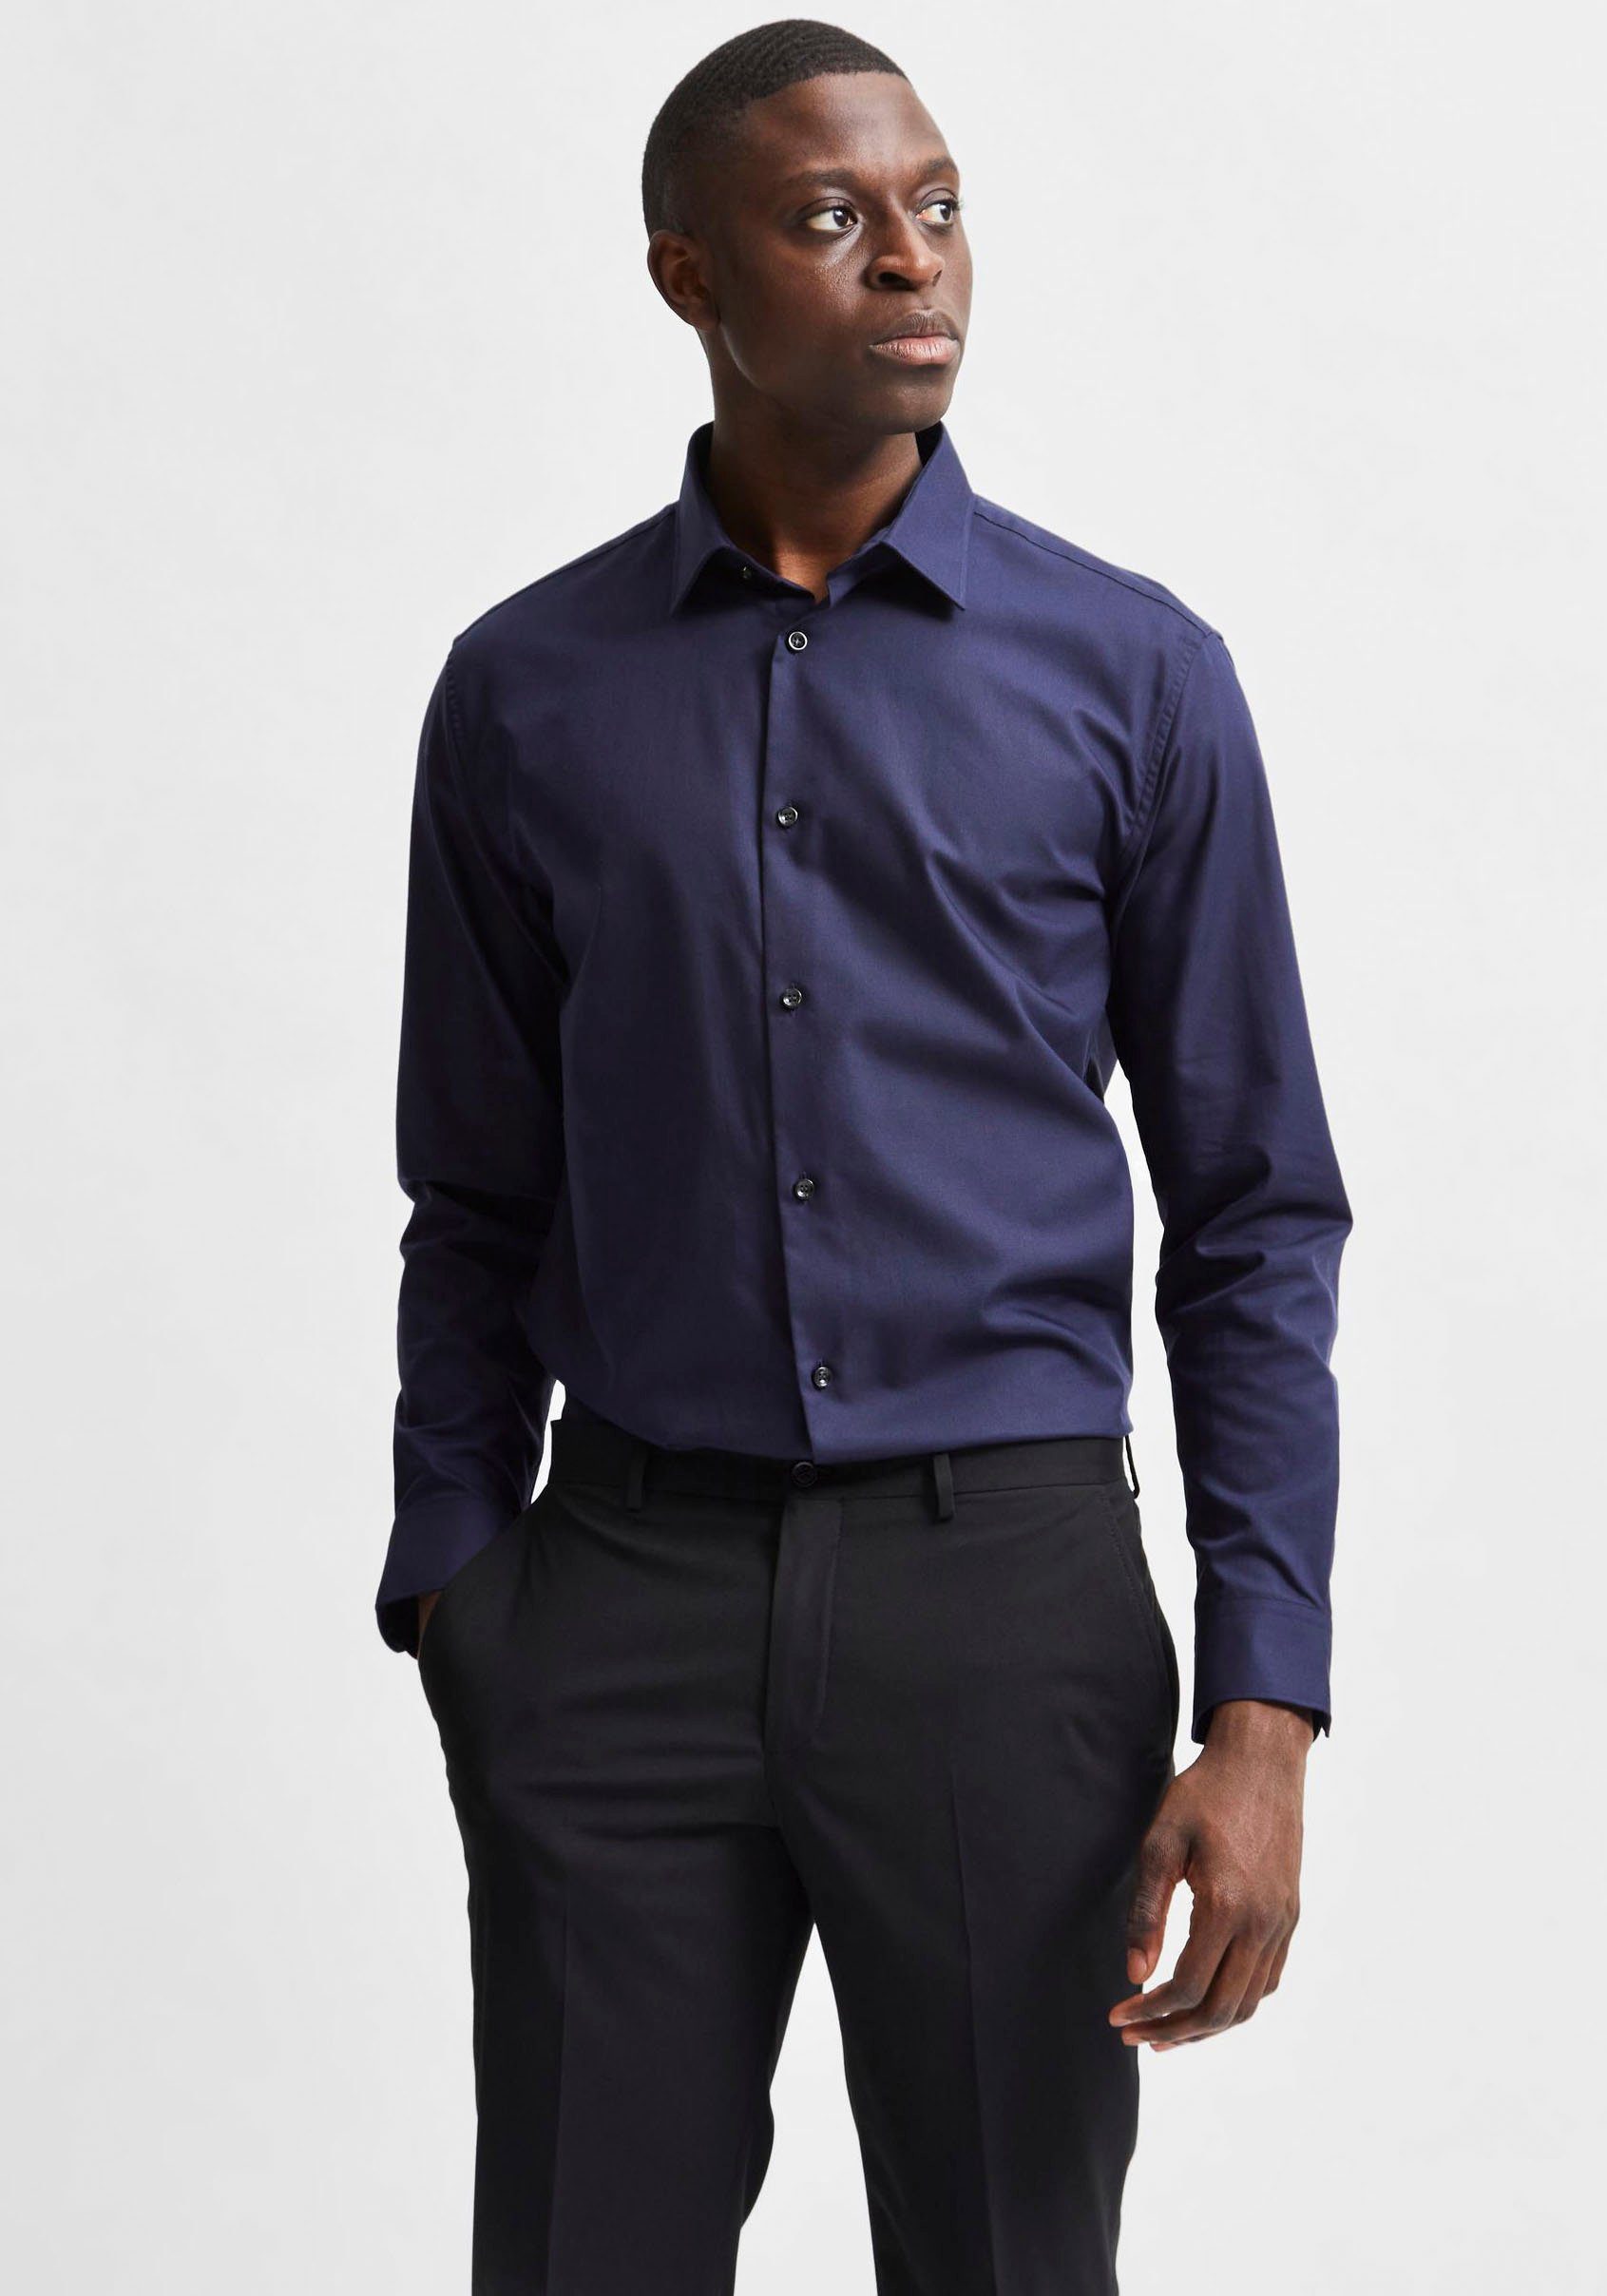 Sehr empfehlenswert SELECTED HOMME Businesshemd SLHSLIMETHAN SHIRT navy